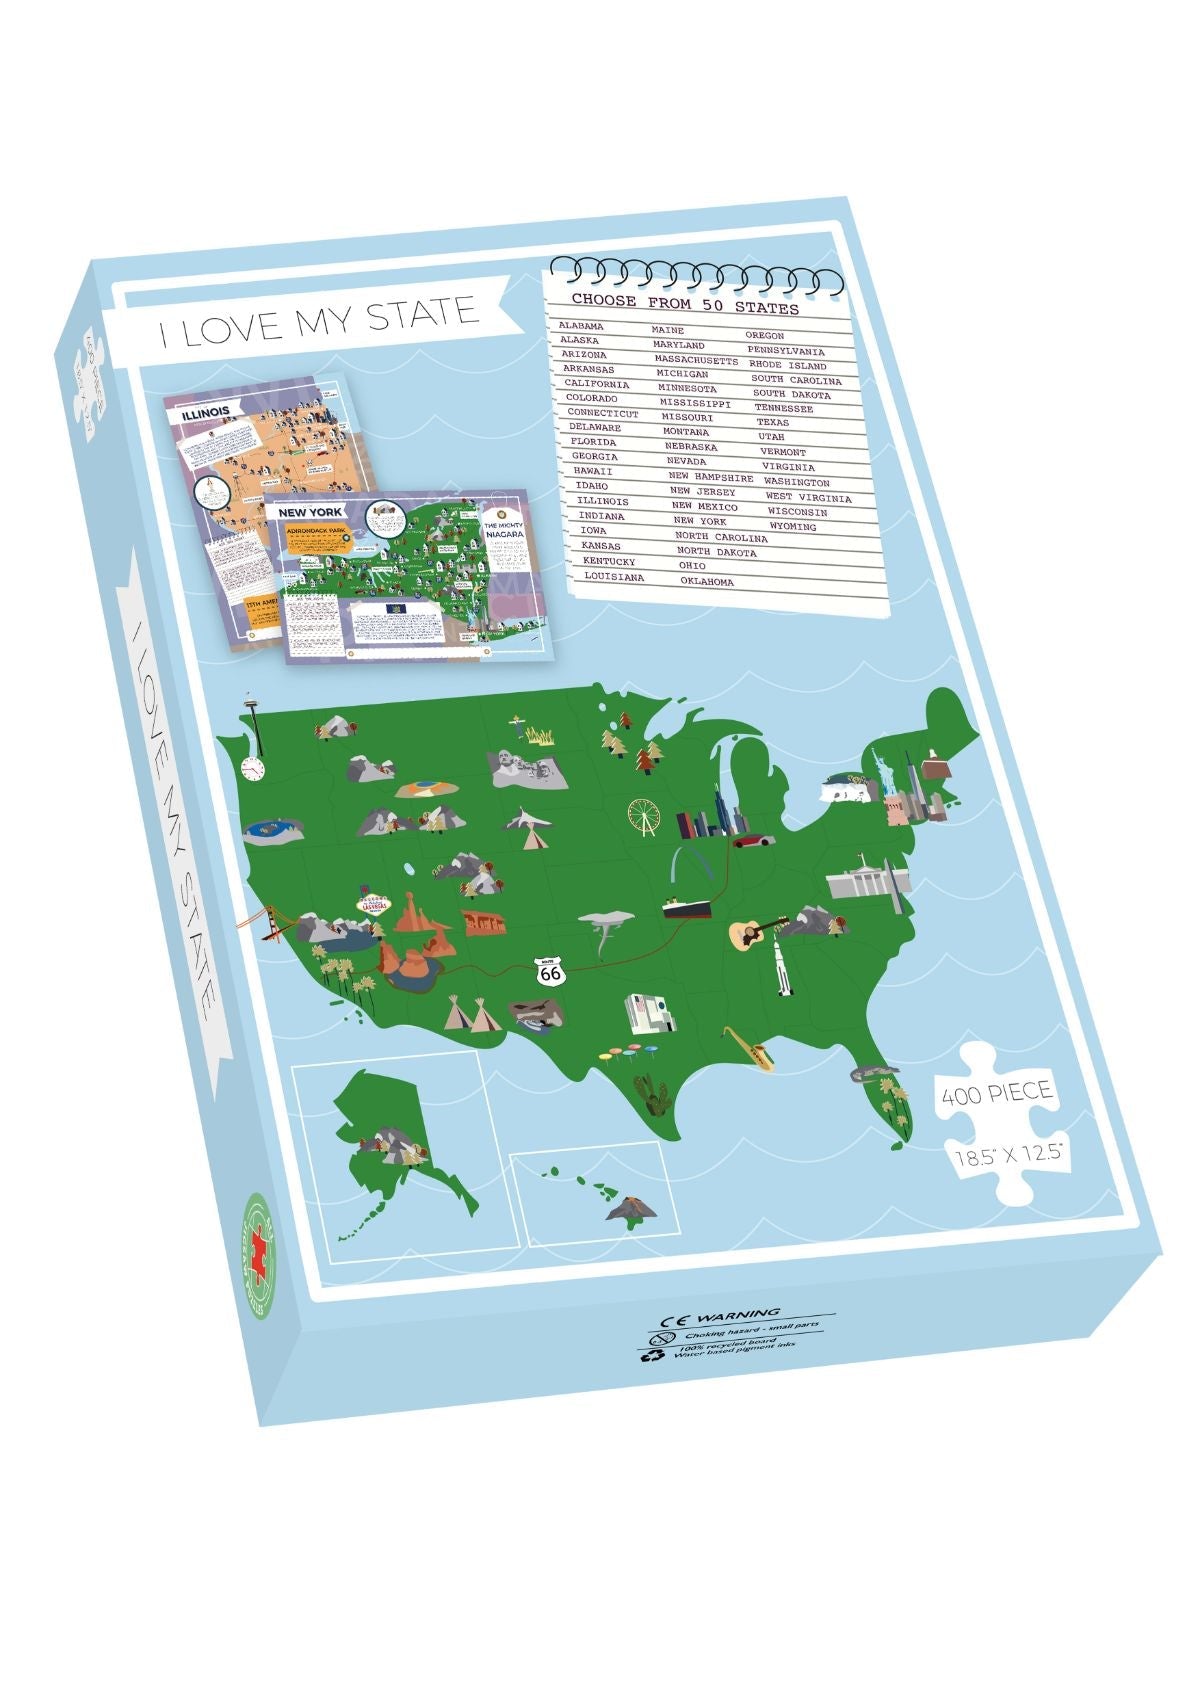 Virginia - I Love My State 400 Piece Personalized Jigsaw Puzzle